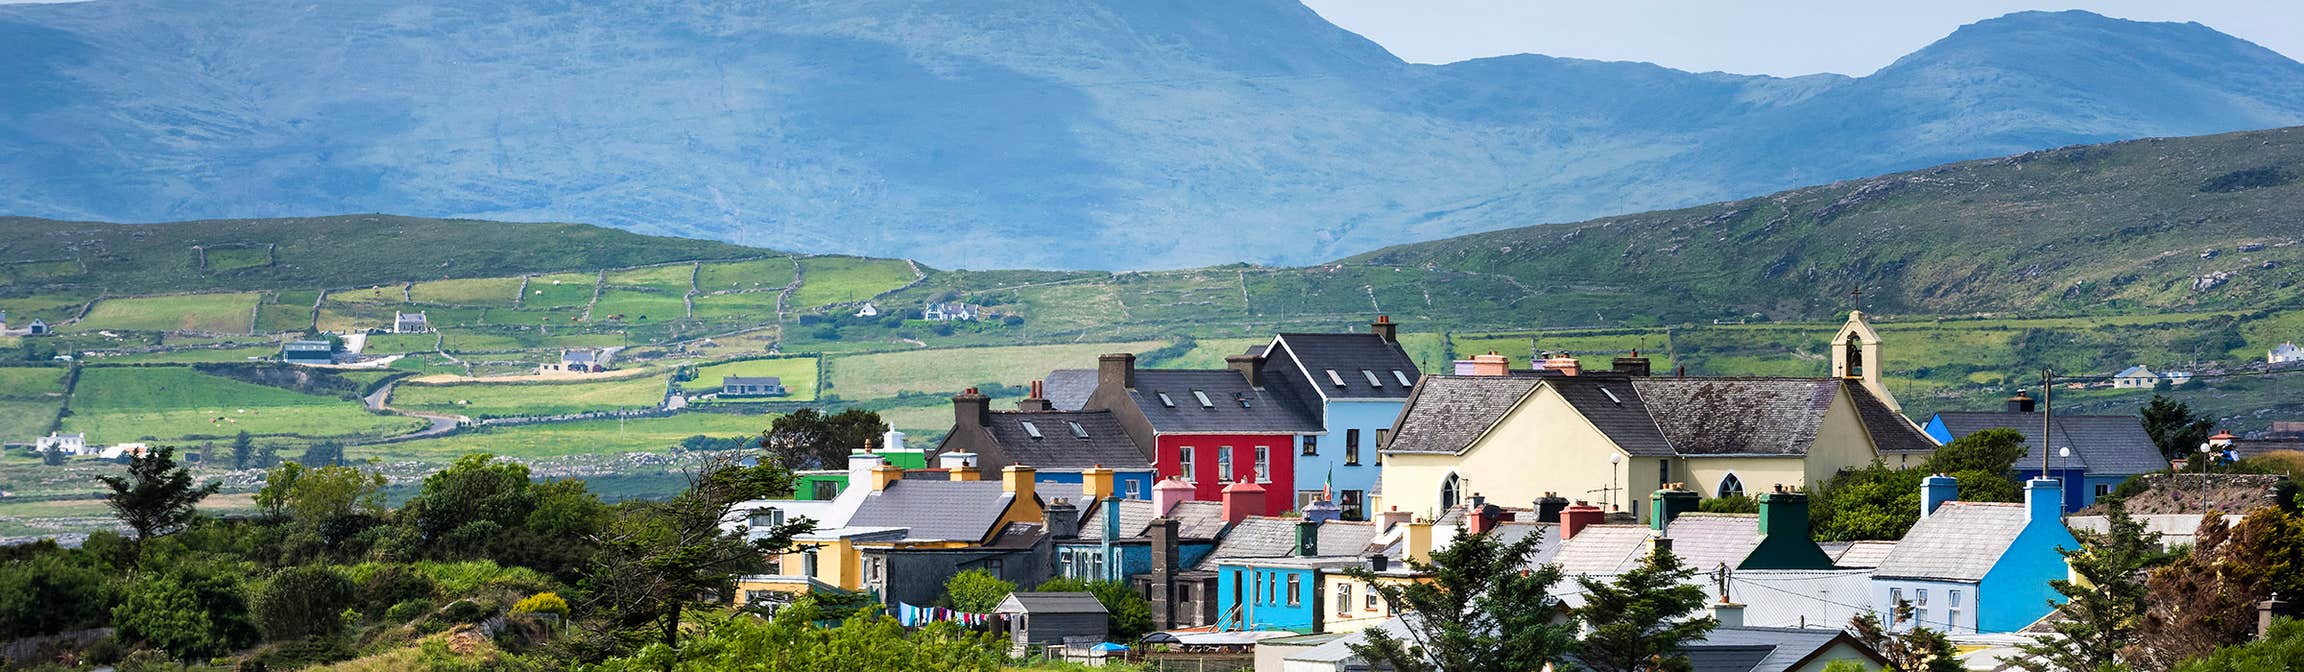 Colourful houses in Eyeries Village, West Cork, County Cork